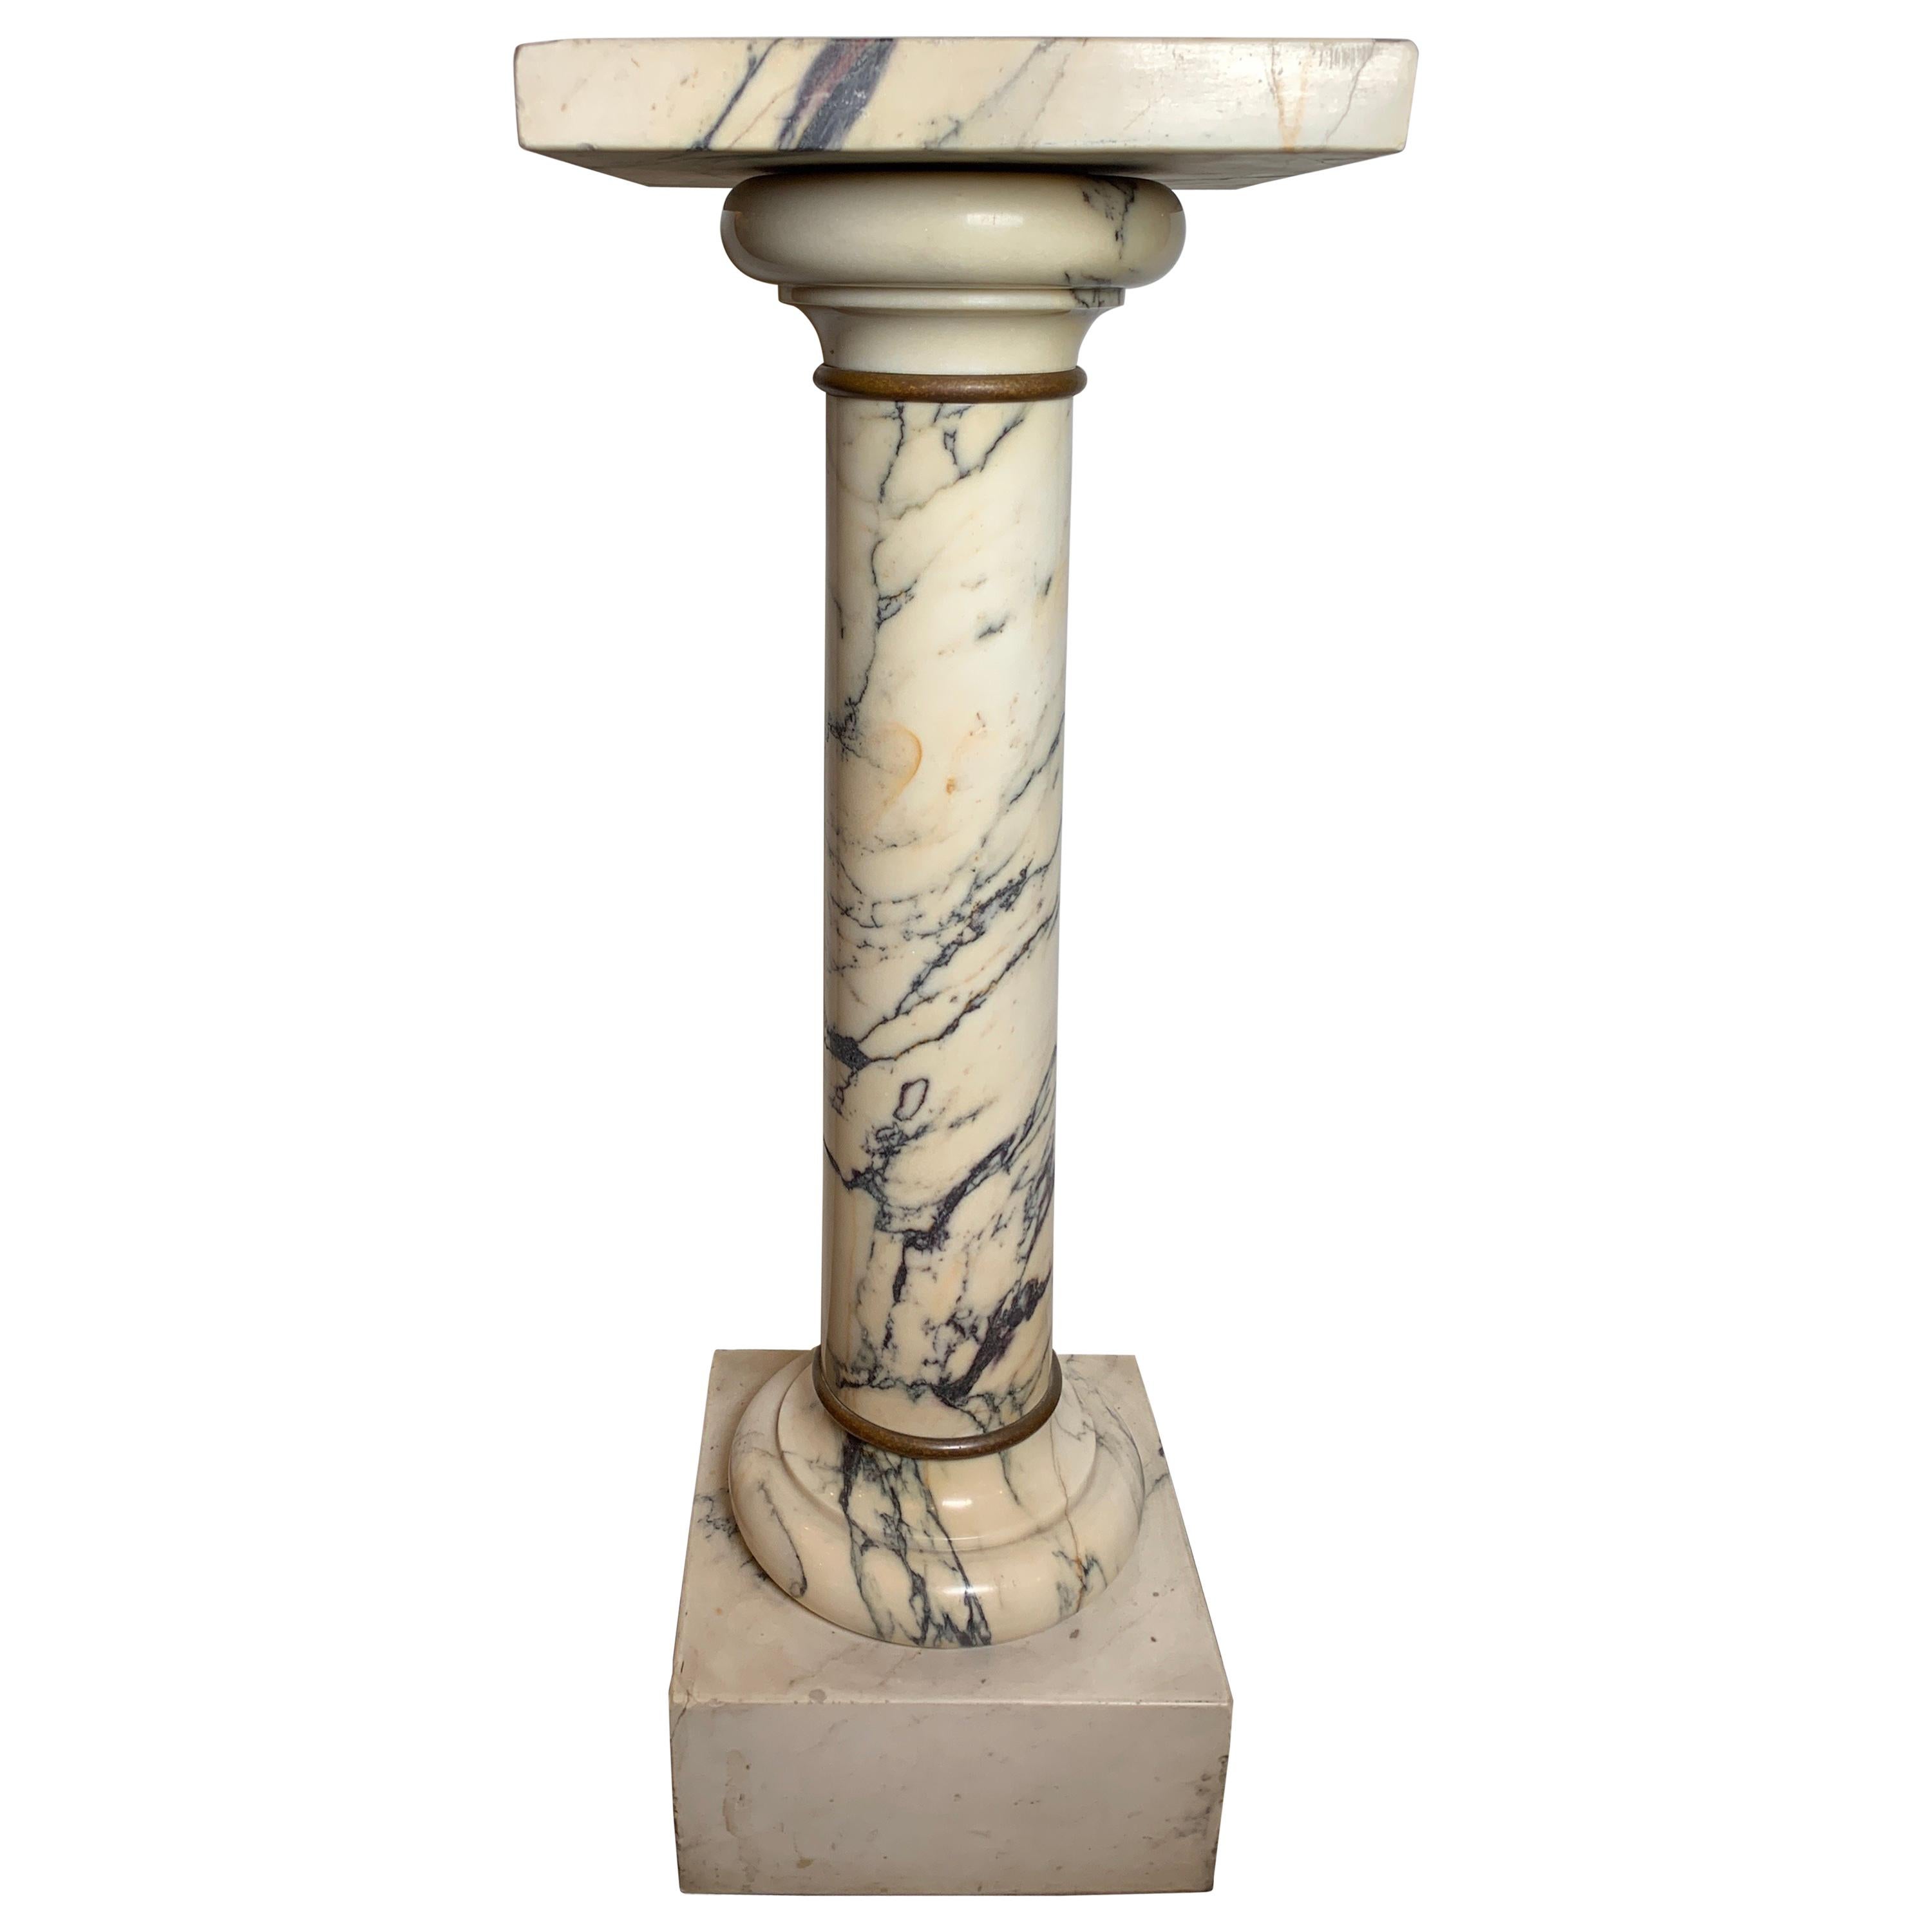 Traditional Italian Marble Pedestal W/ Simple Bronze Ring Accents, circa 1890s